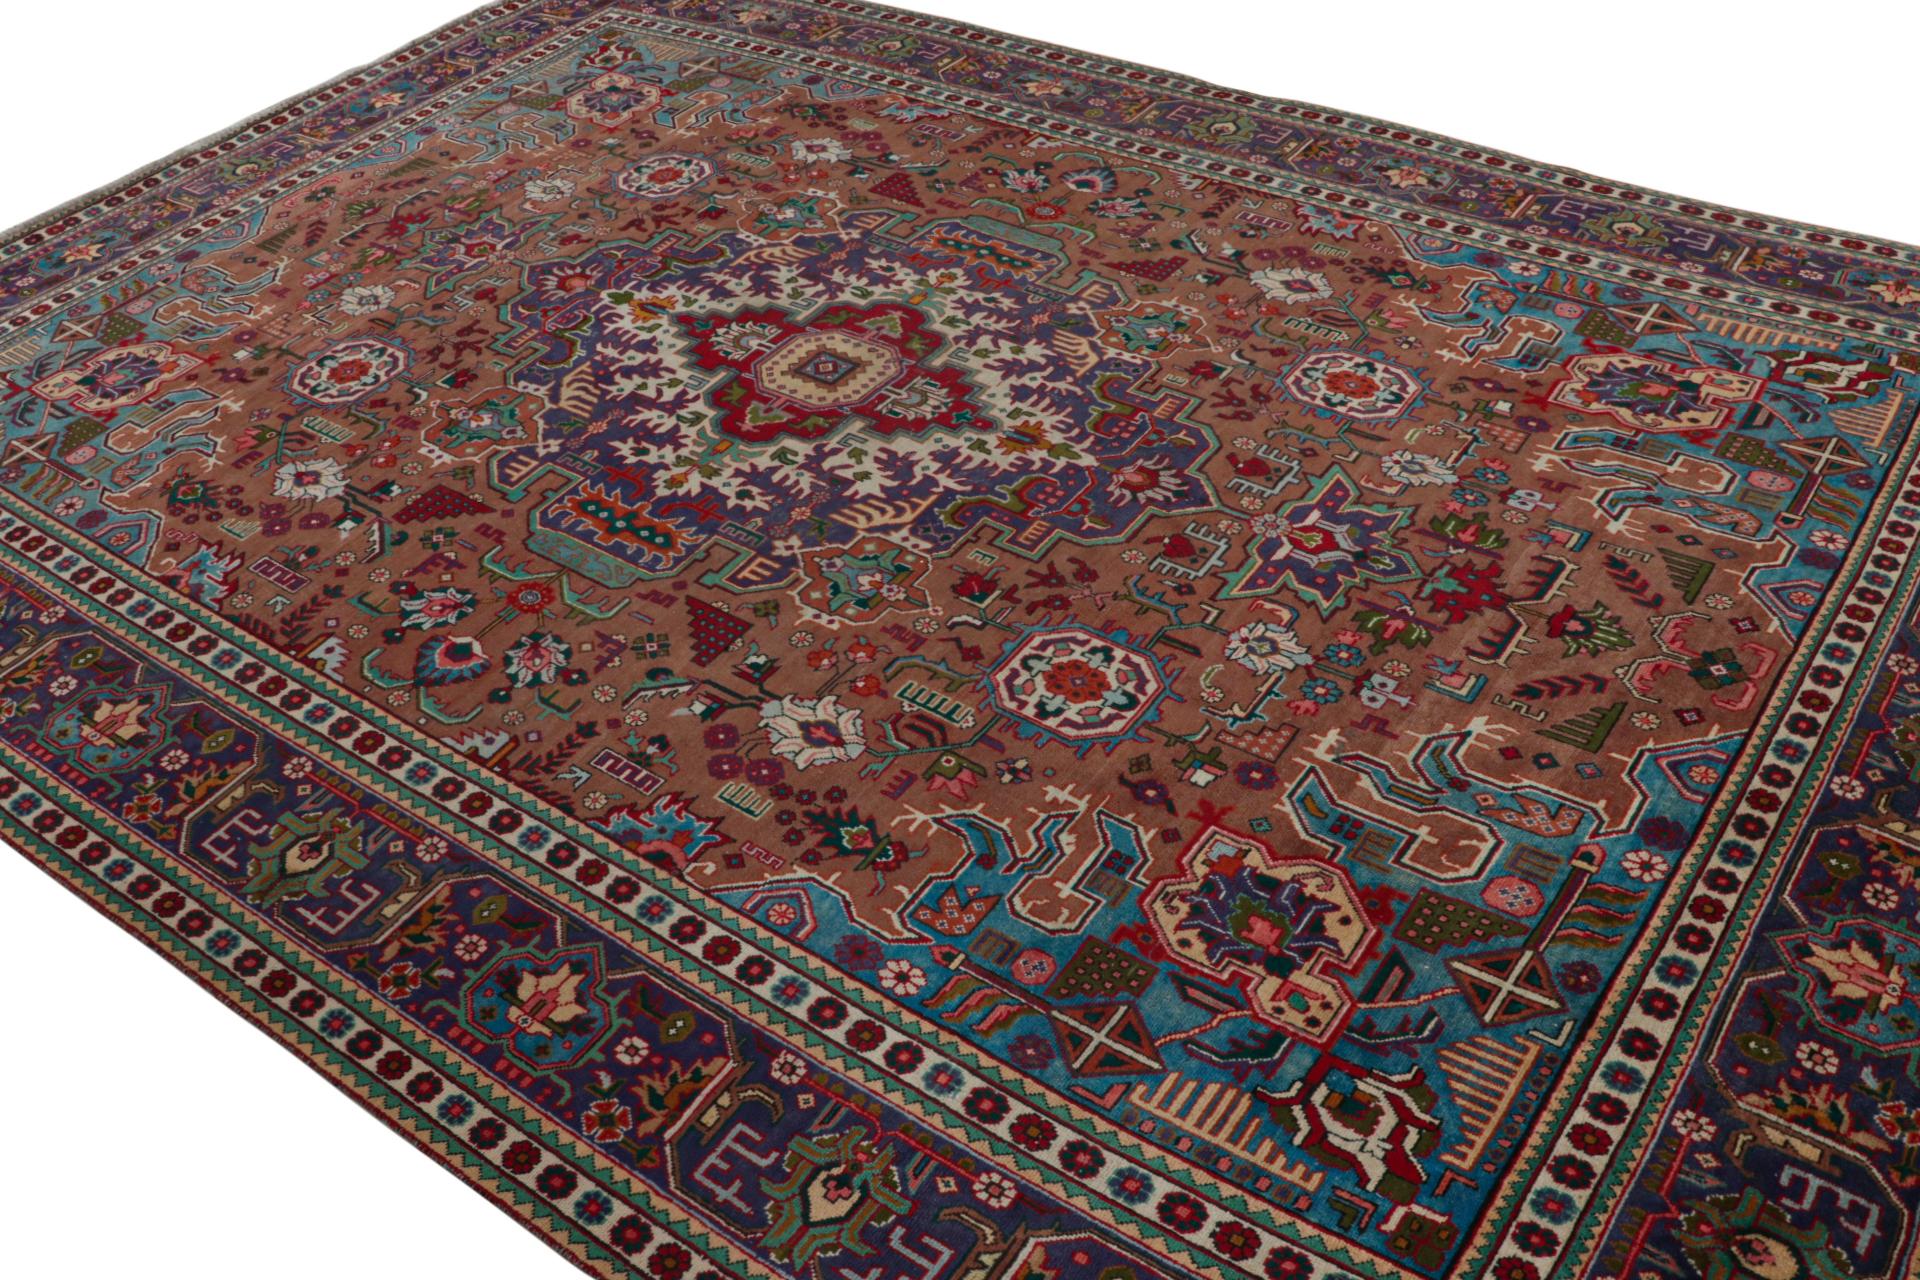 Handknotted in wool, a vintage 10x13 Persian rug originating circa 1970-1980 - latest to enter Rug & Kilim’s assortment of one of a kind vintage pieces.

On the Design:

This handsome piece carries an impressive number of colors. Keen eyes will note